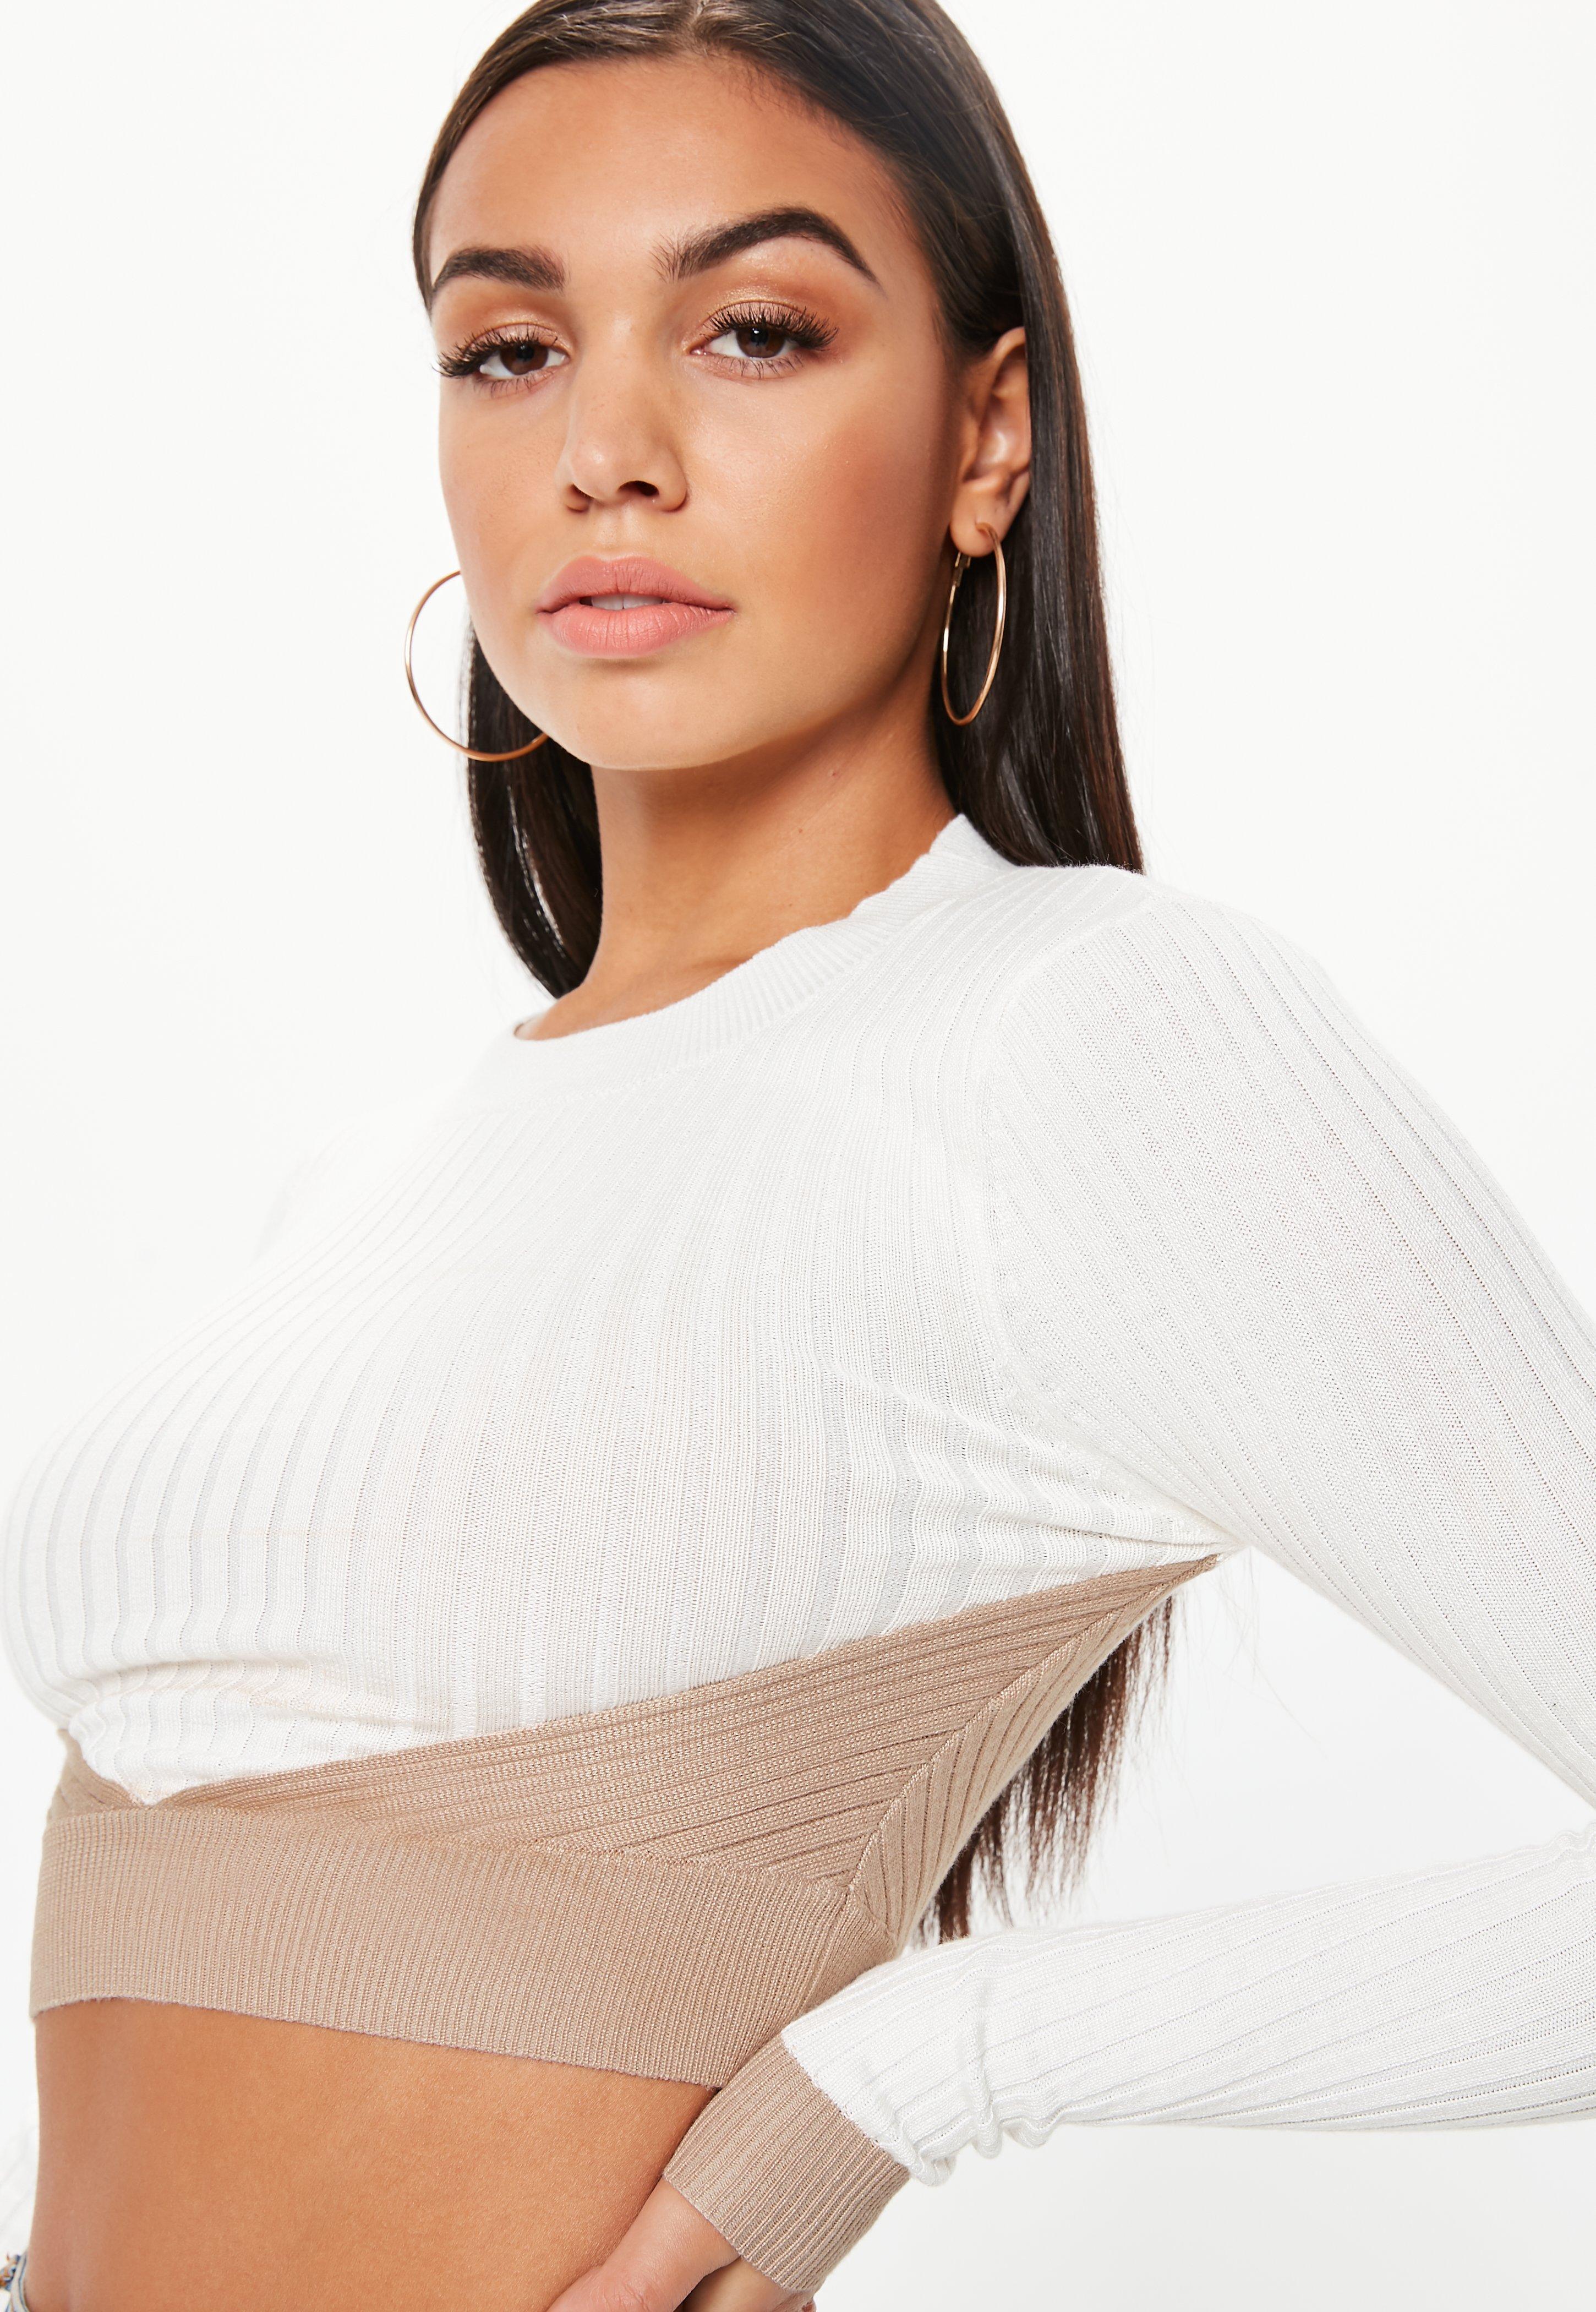 Missguided Synthetic Cream Colourblock High Neck Knitted Crop Top - Lyst